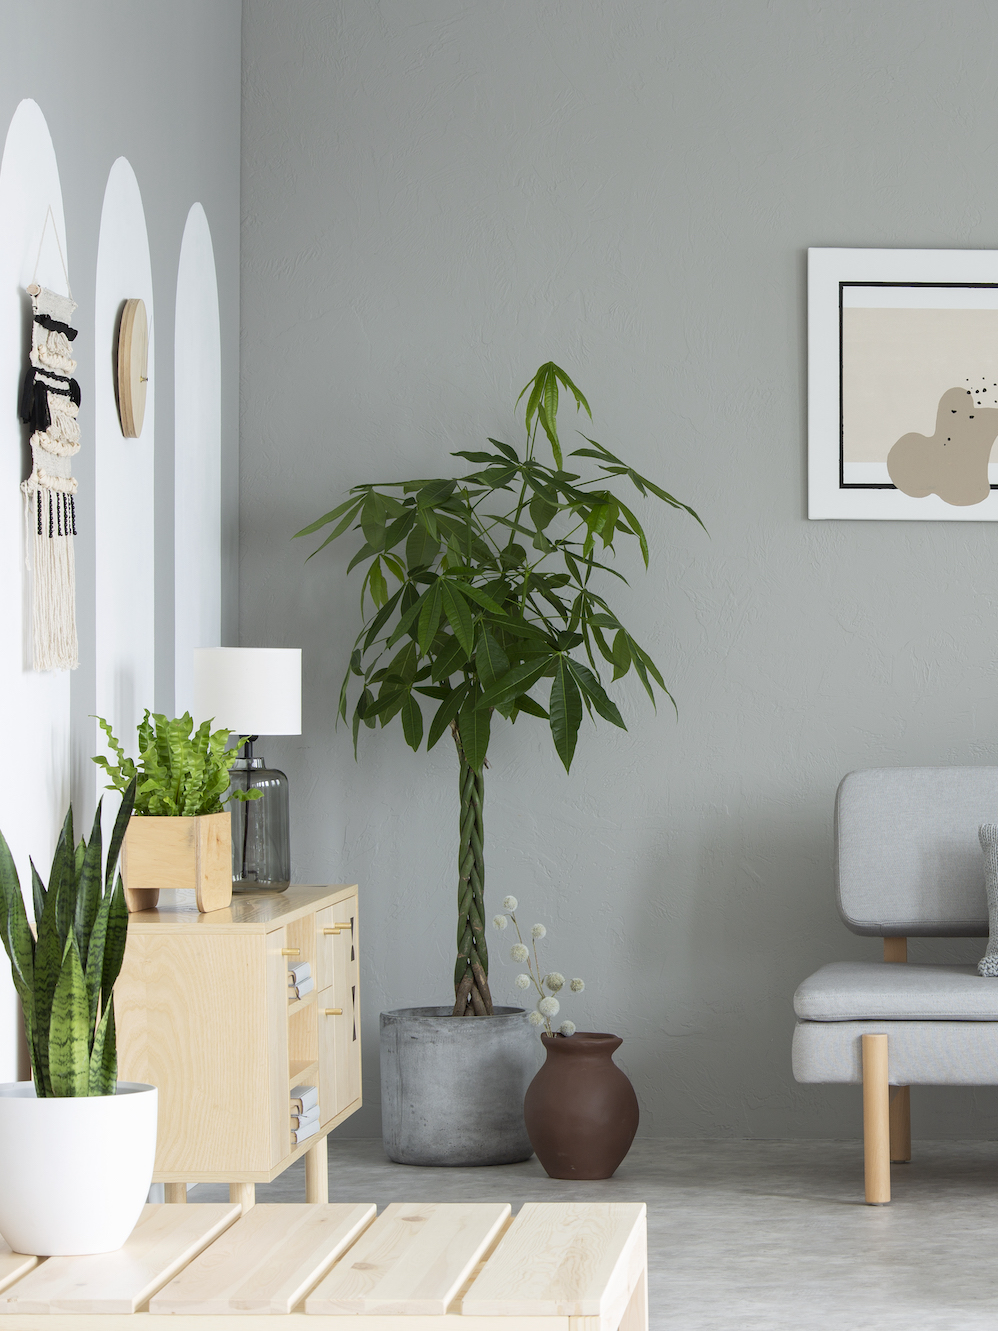 Wooden table in front of grey sofa in simple living room interior with posters and plants. Real photo